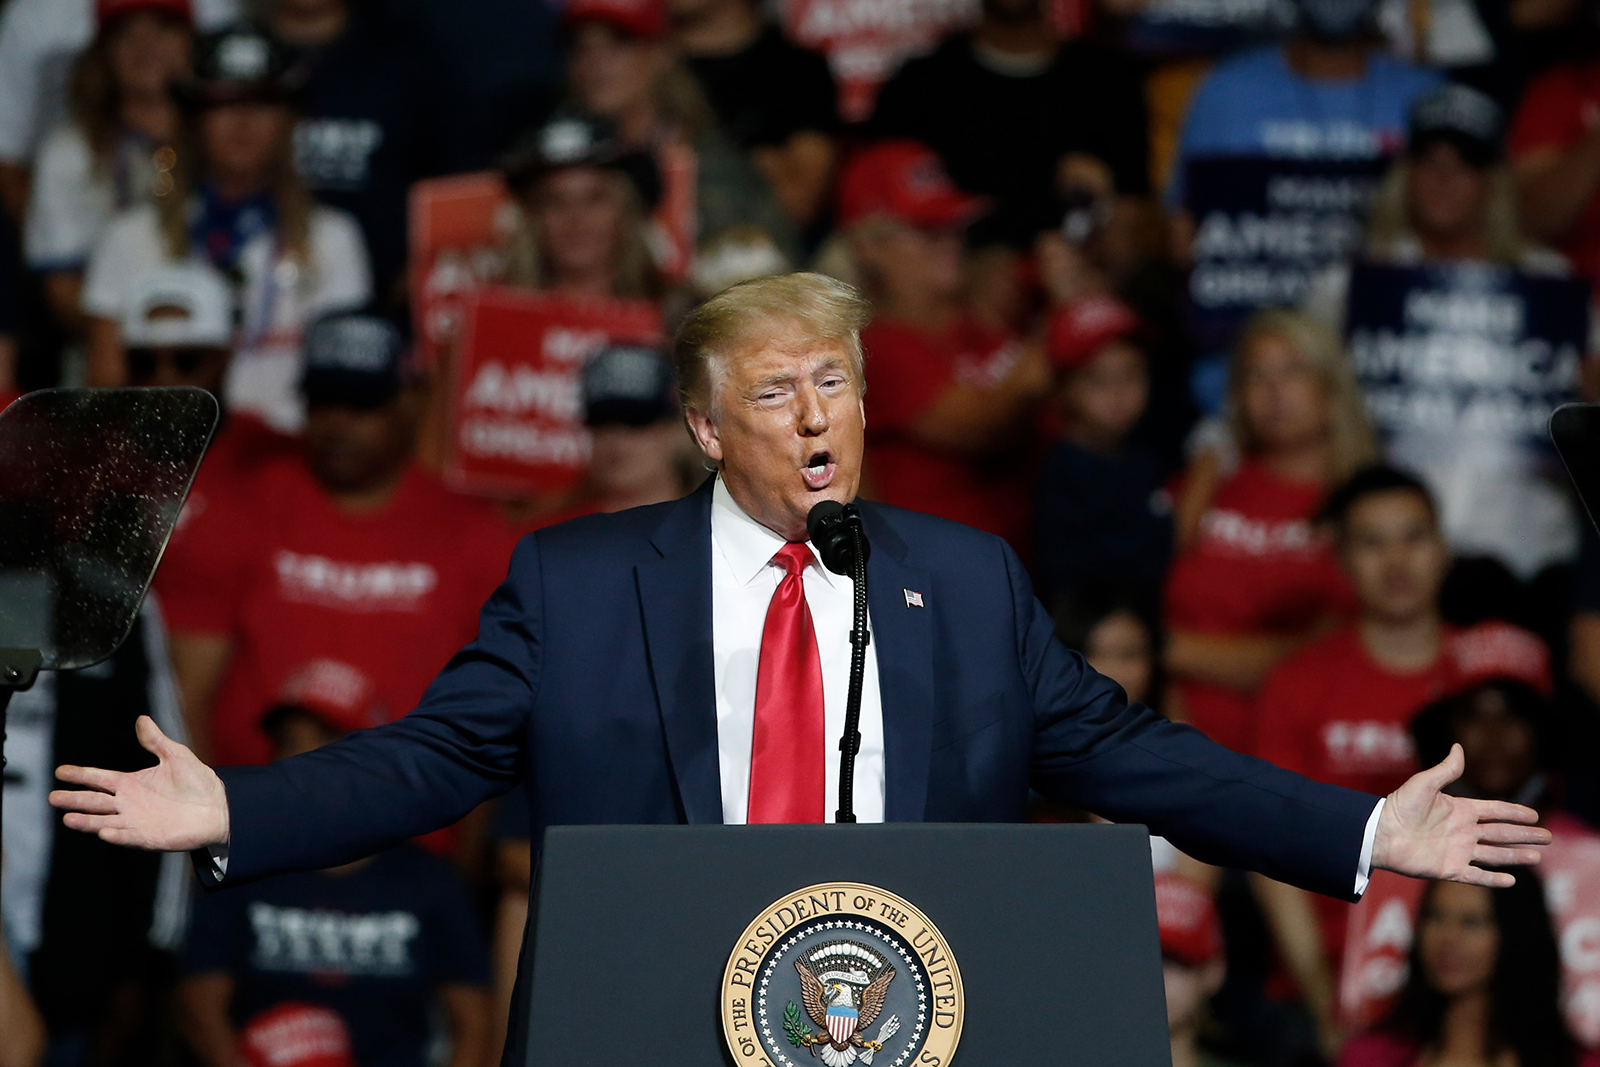 US President Donald Trump speaks during a campaign rally in Tulsa, Oklahoma, on Saturday, June 20.